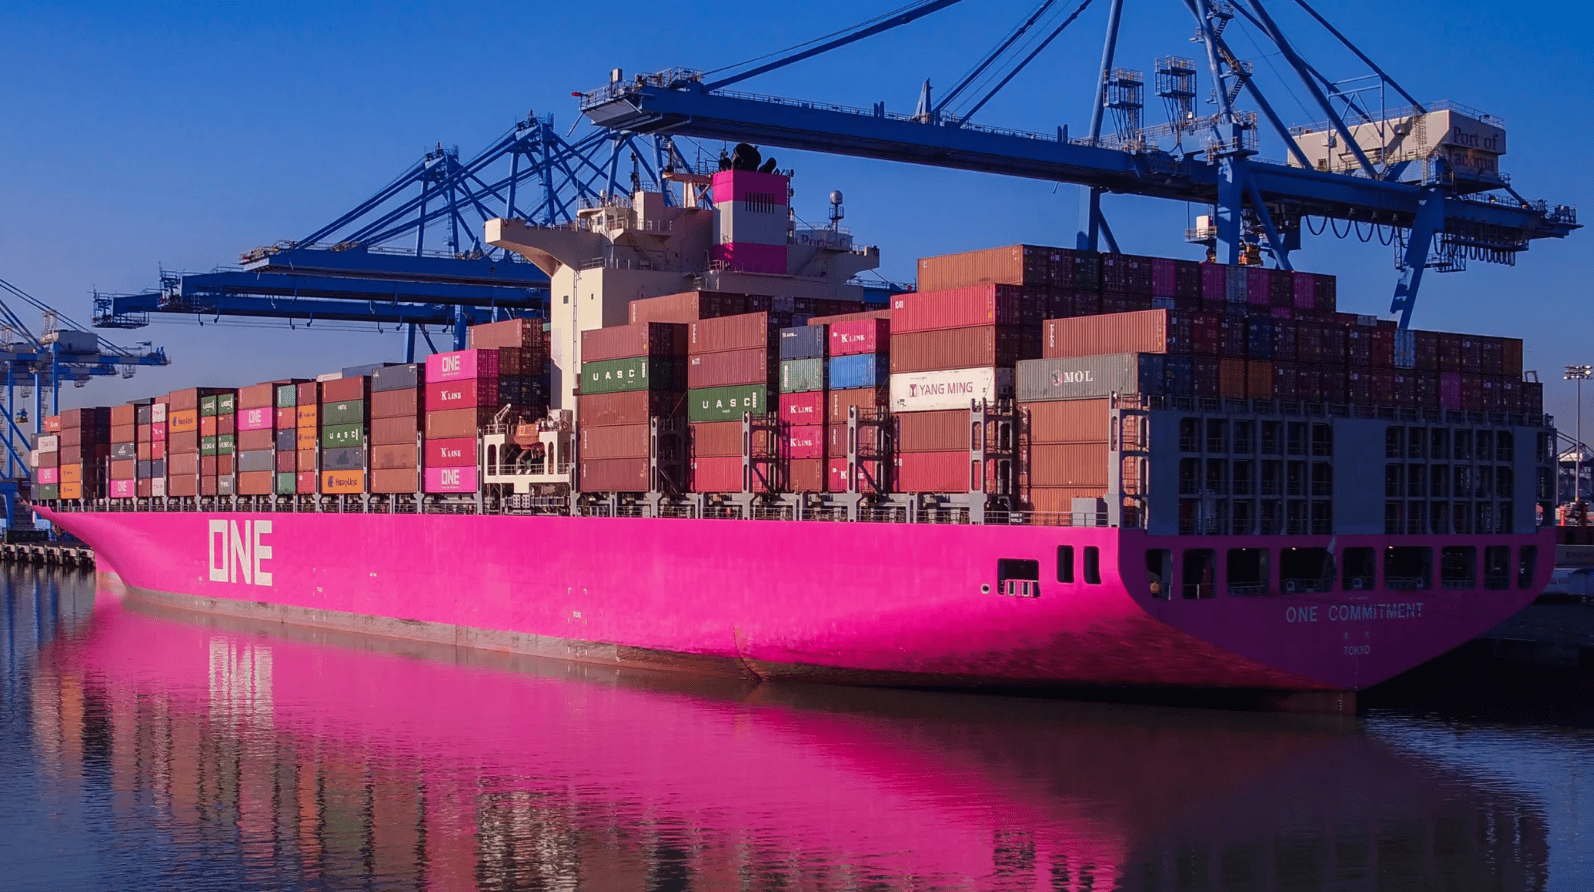 Naval architecture, Shipping container, Water, Sky, Light, Watercraft, Boat, Pink, Dusk, Lake